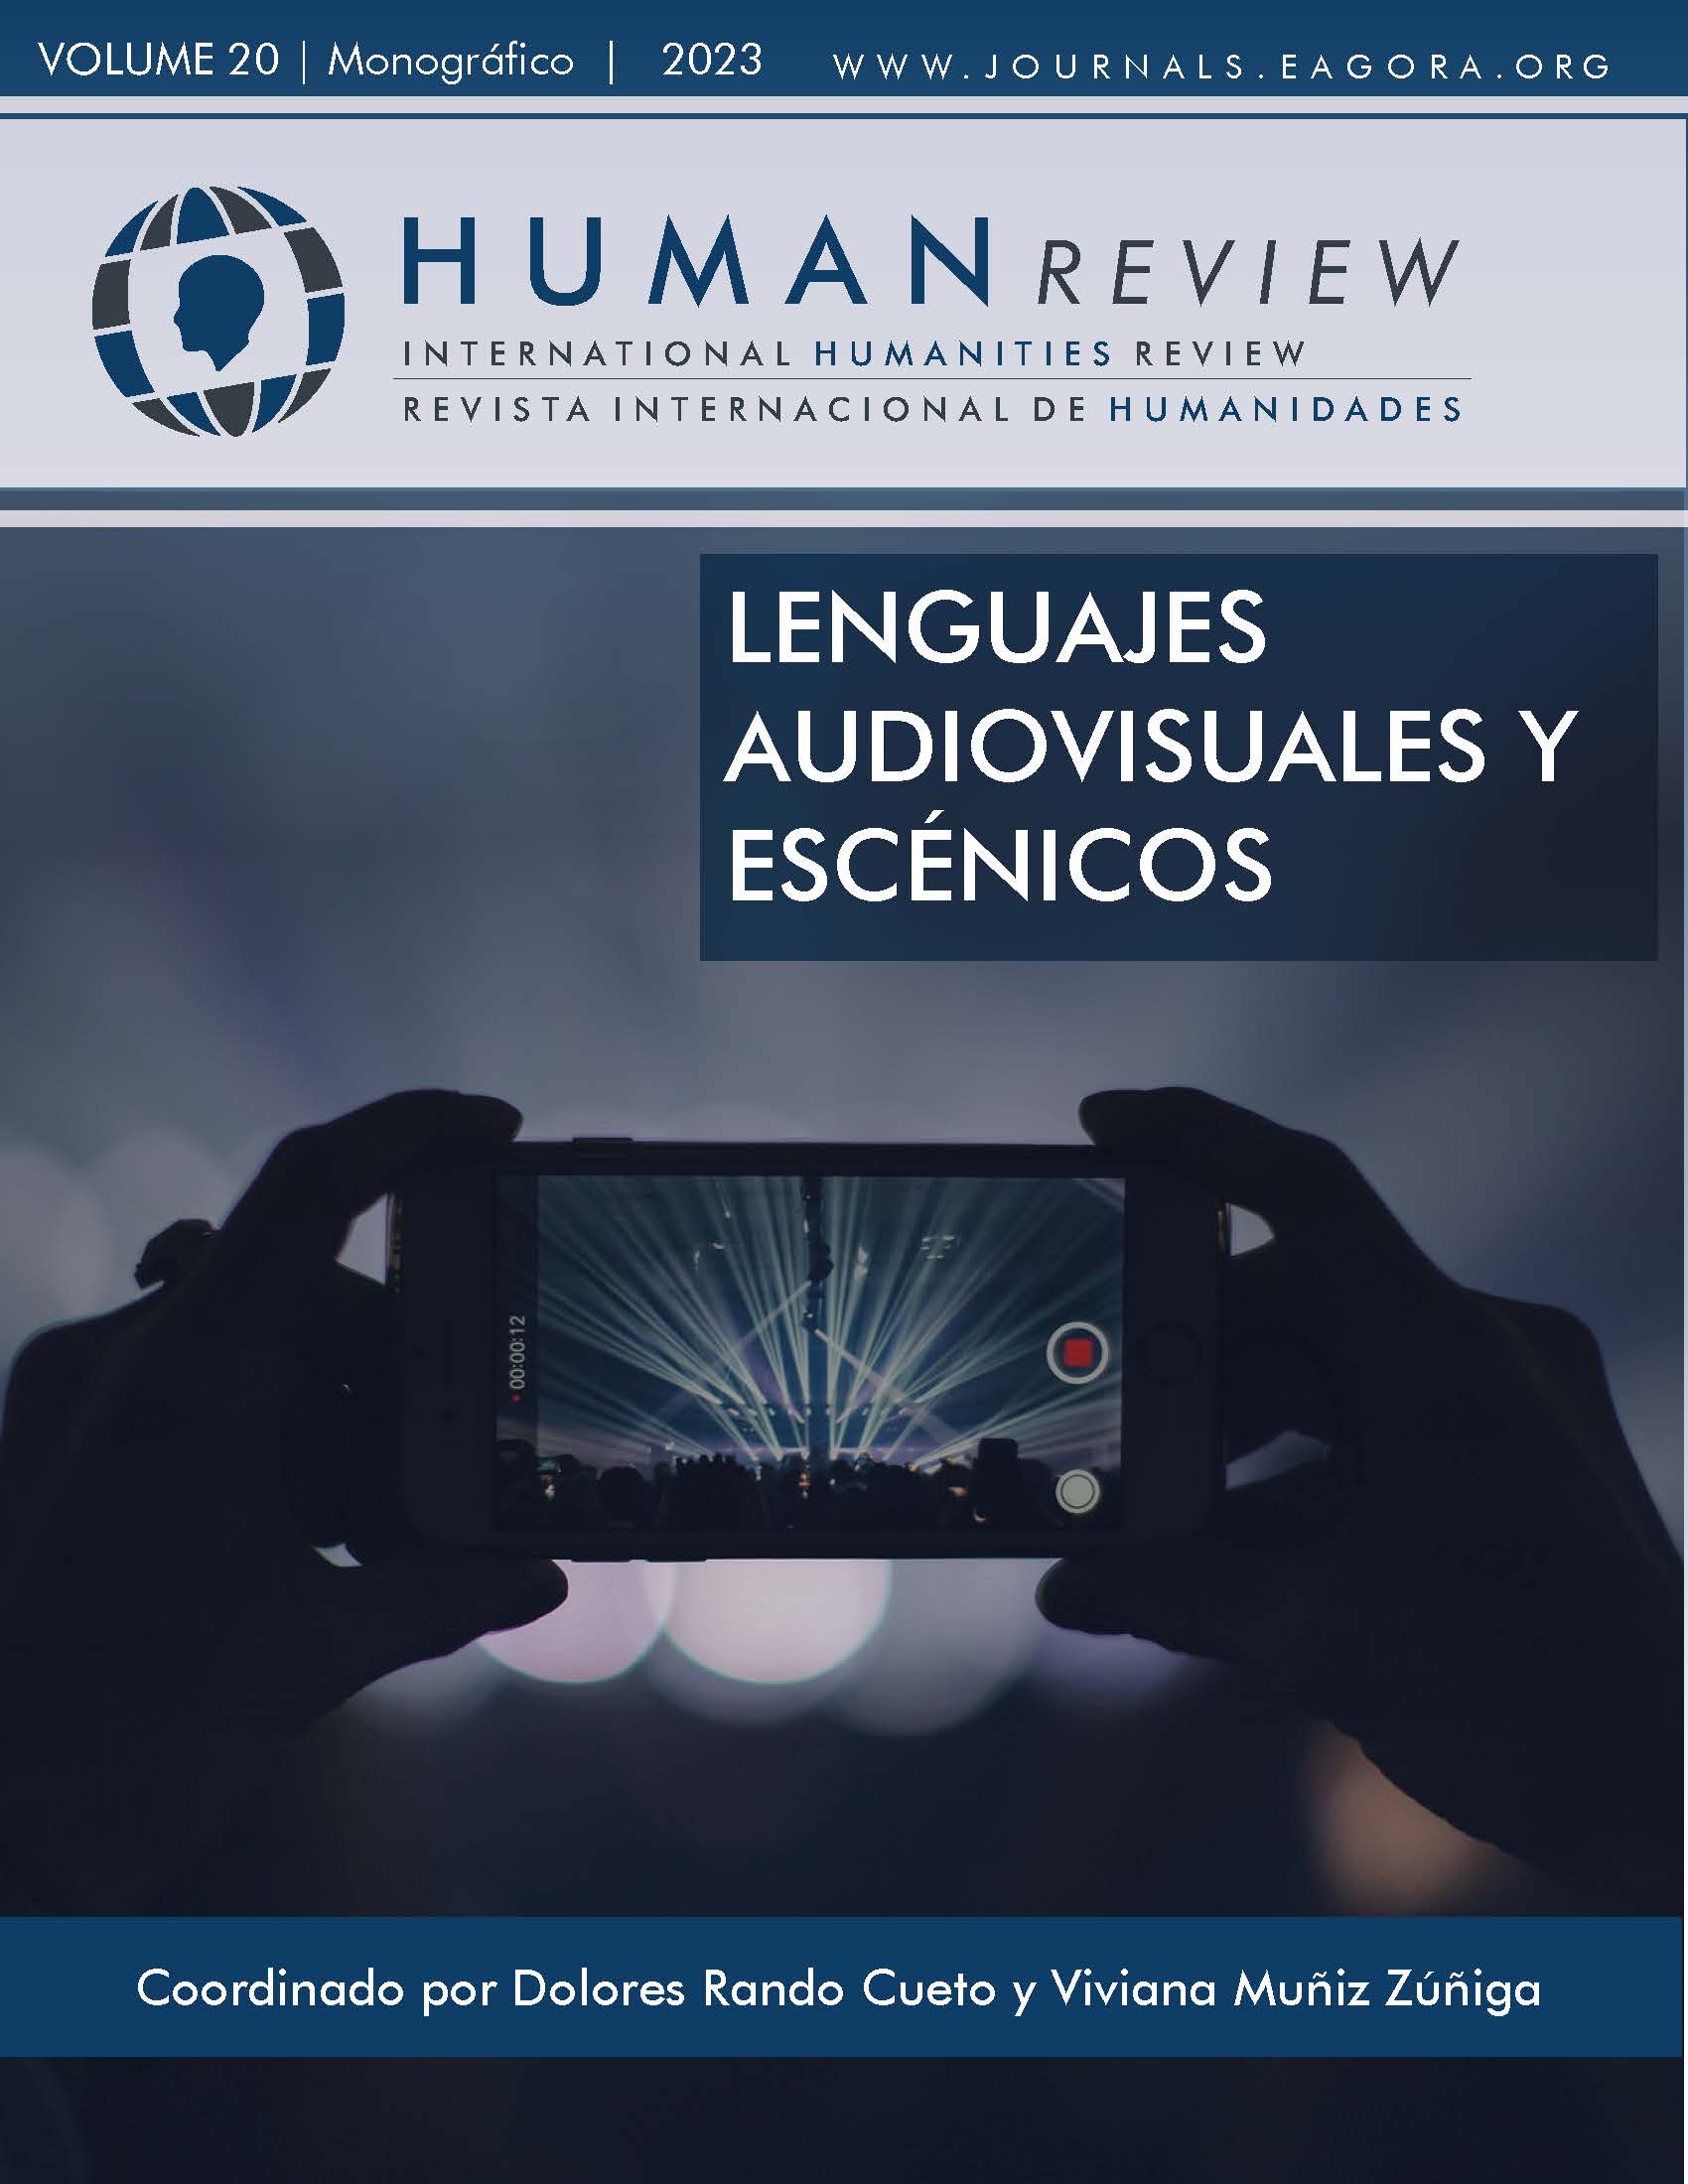 					View Vol. 20 No. 2 (2023): Monograph: "Audiovisual and scenic languages"
				